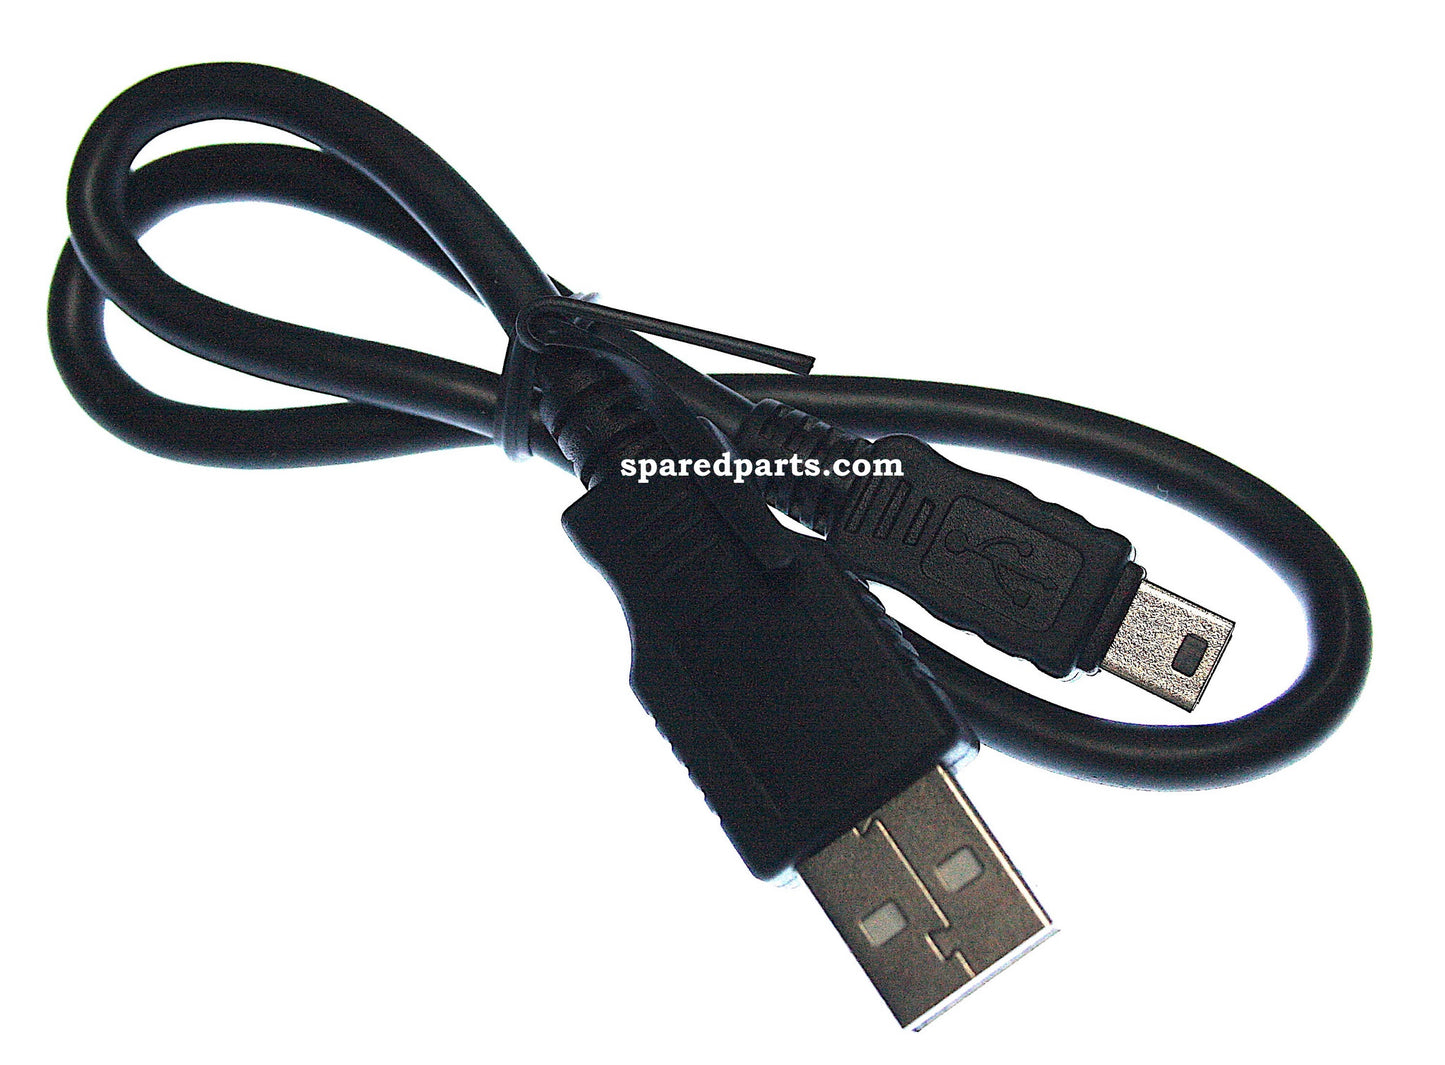 LG Electronic Mini USB Cable EAD61881001 - Spared Parts UK